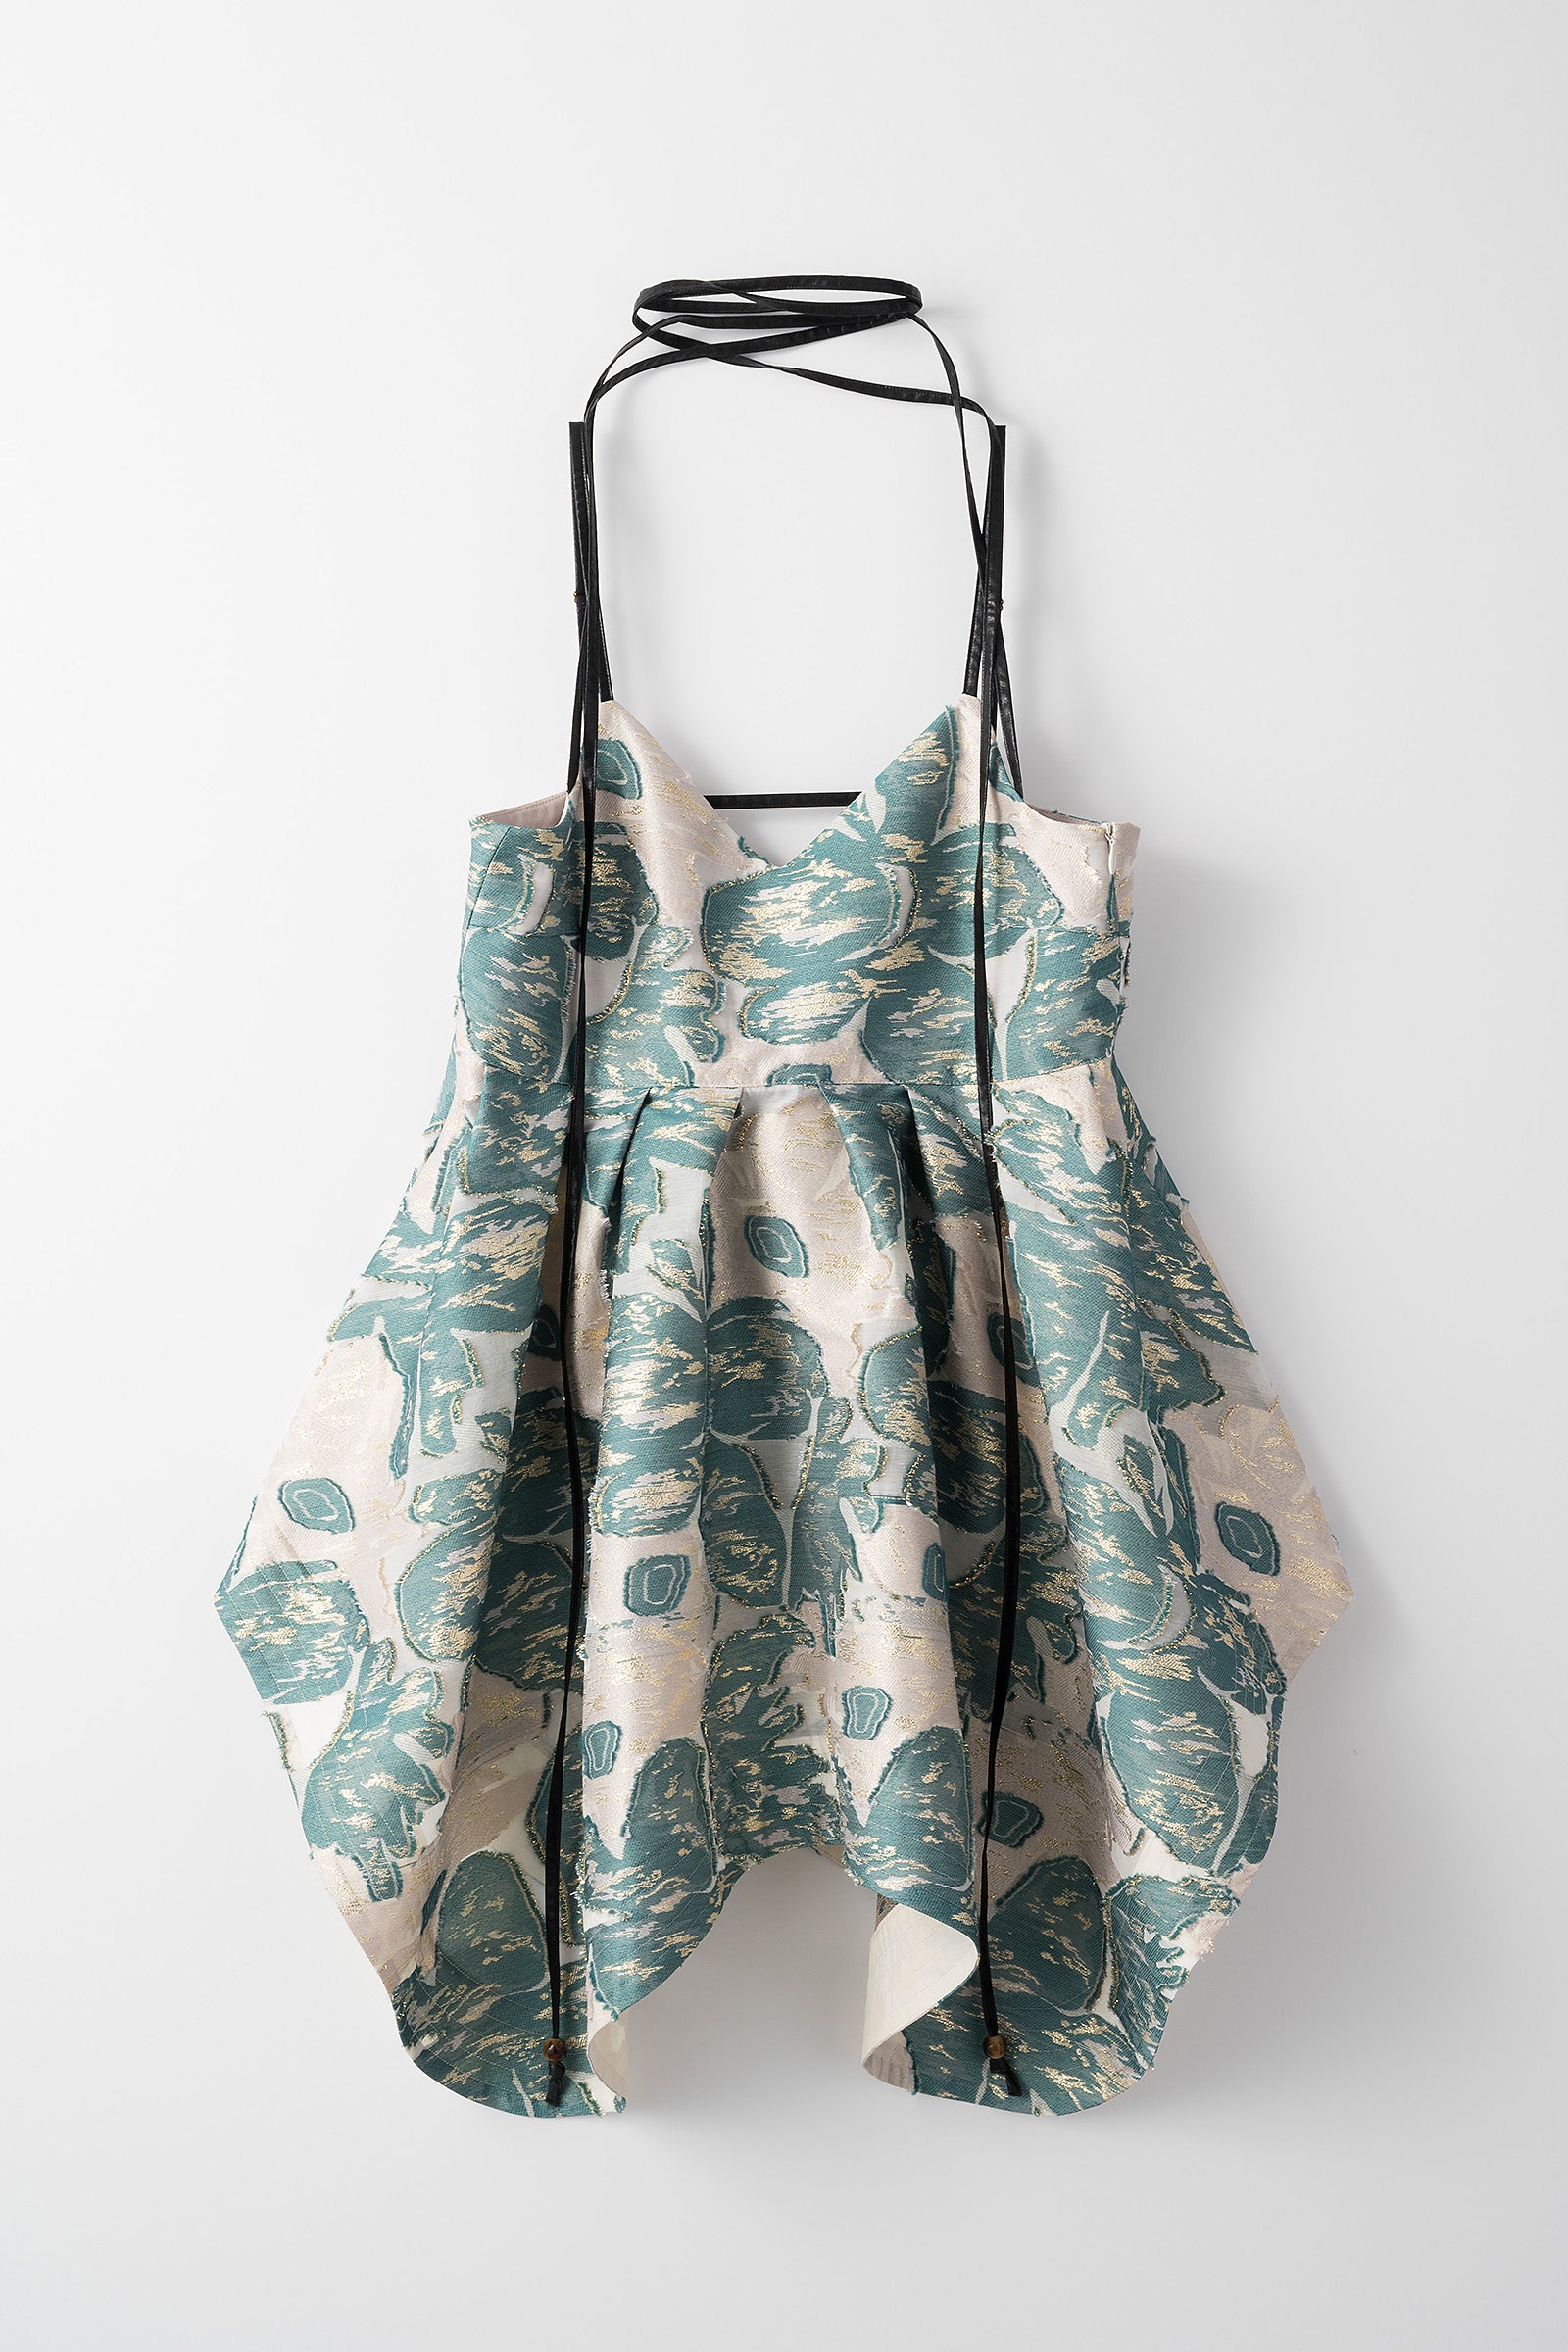 MURRAL / Flower jacquard camisole top-